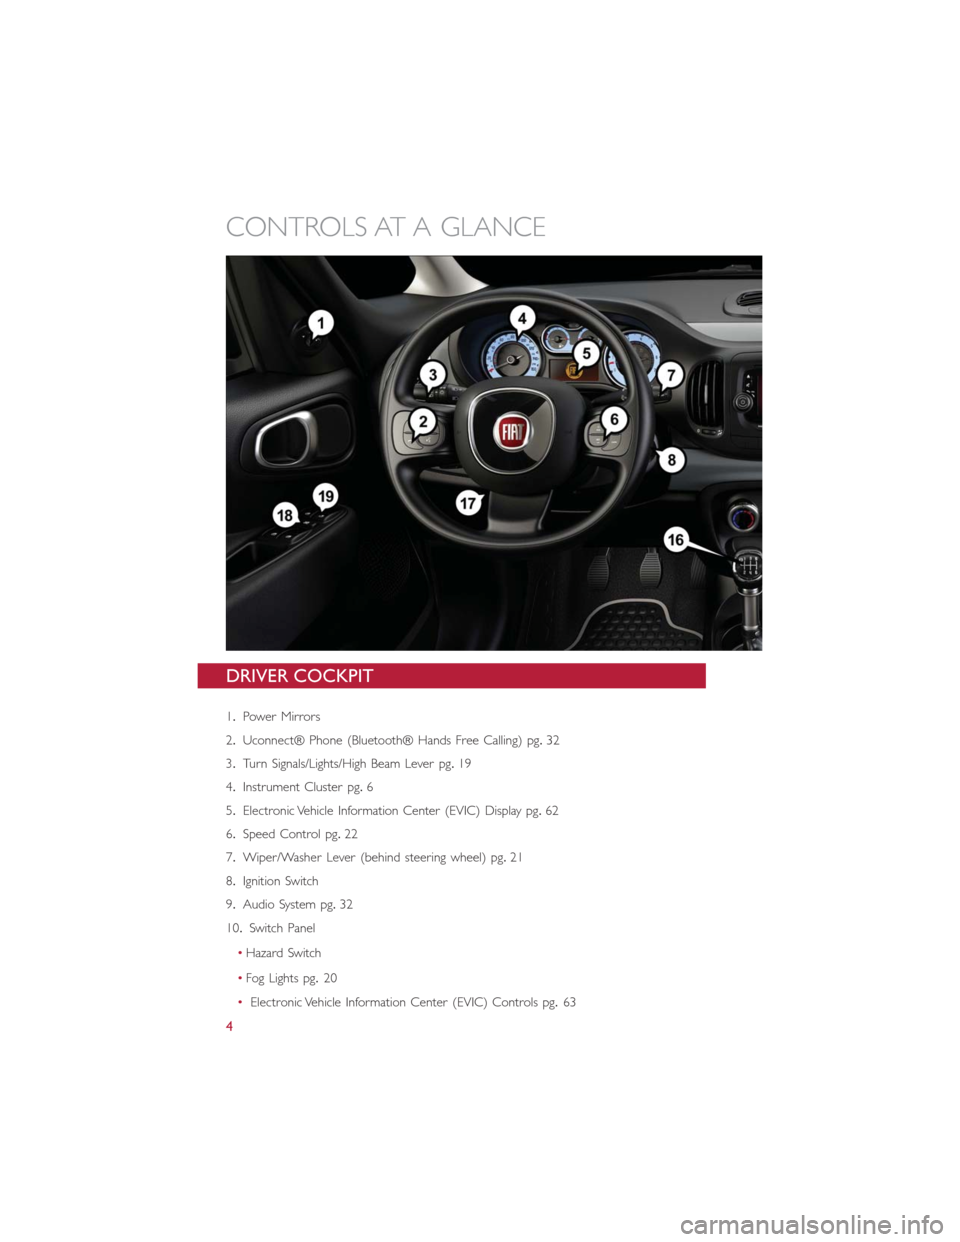 FIAT 500L 2014 2.G User Guide DRIVER COCKPIT
1.Power Mirrors
2.Uconnect® Phone (Bluetooth® Hands Free Calling) pg.32
3.Turn Signals/Lights/High Beam Lever pg.19
4.Instrument Cluster pg.6
5.Electronic Vehicle Information Center (